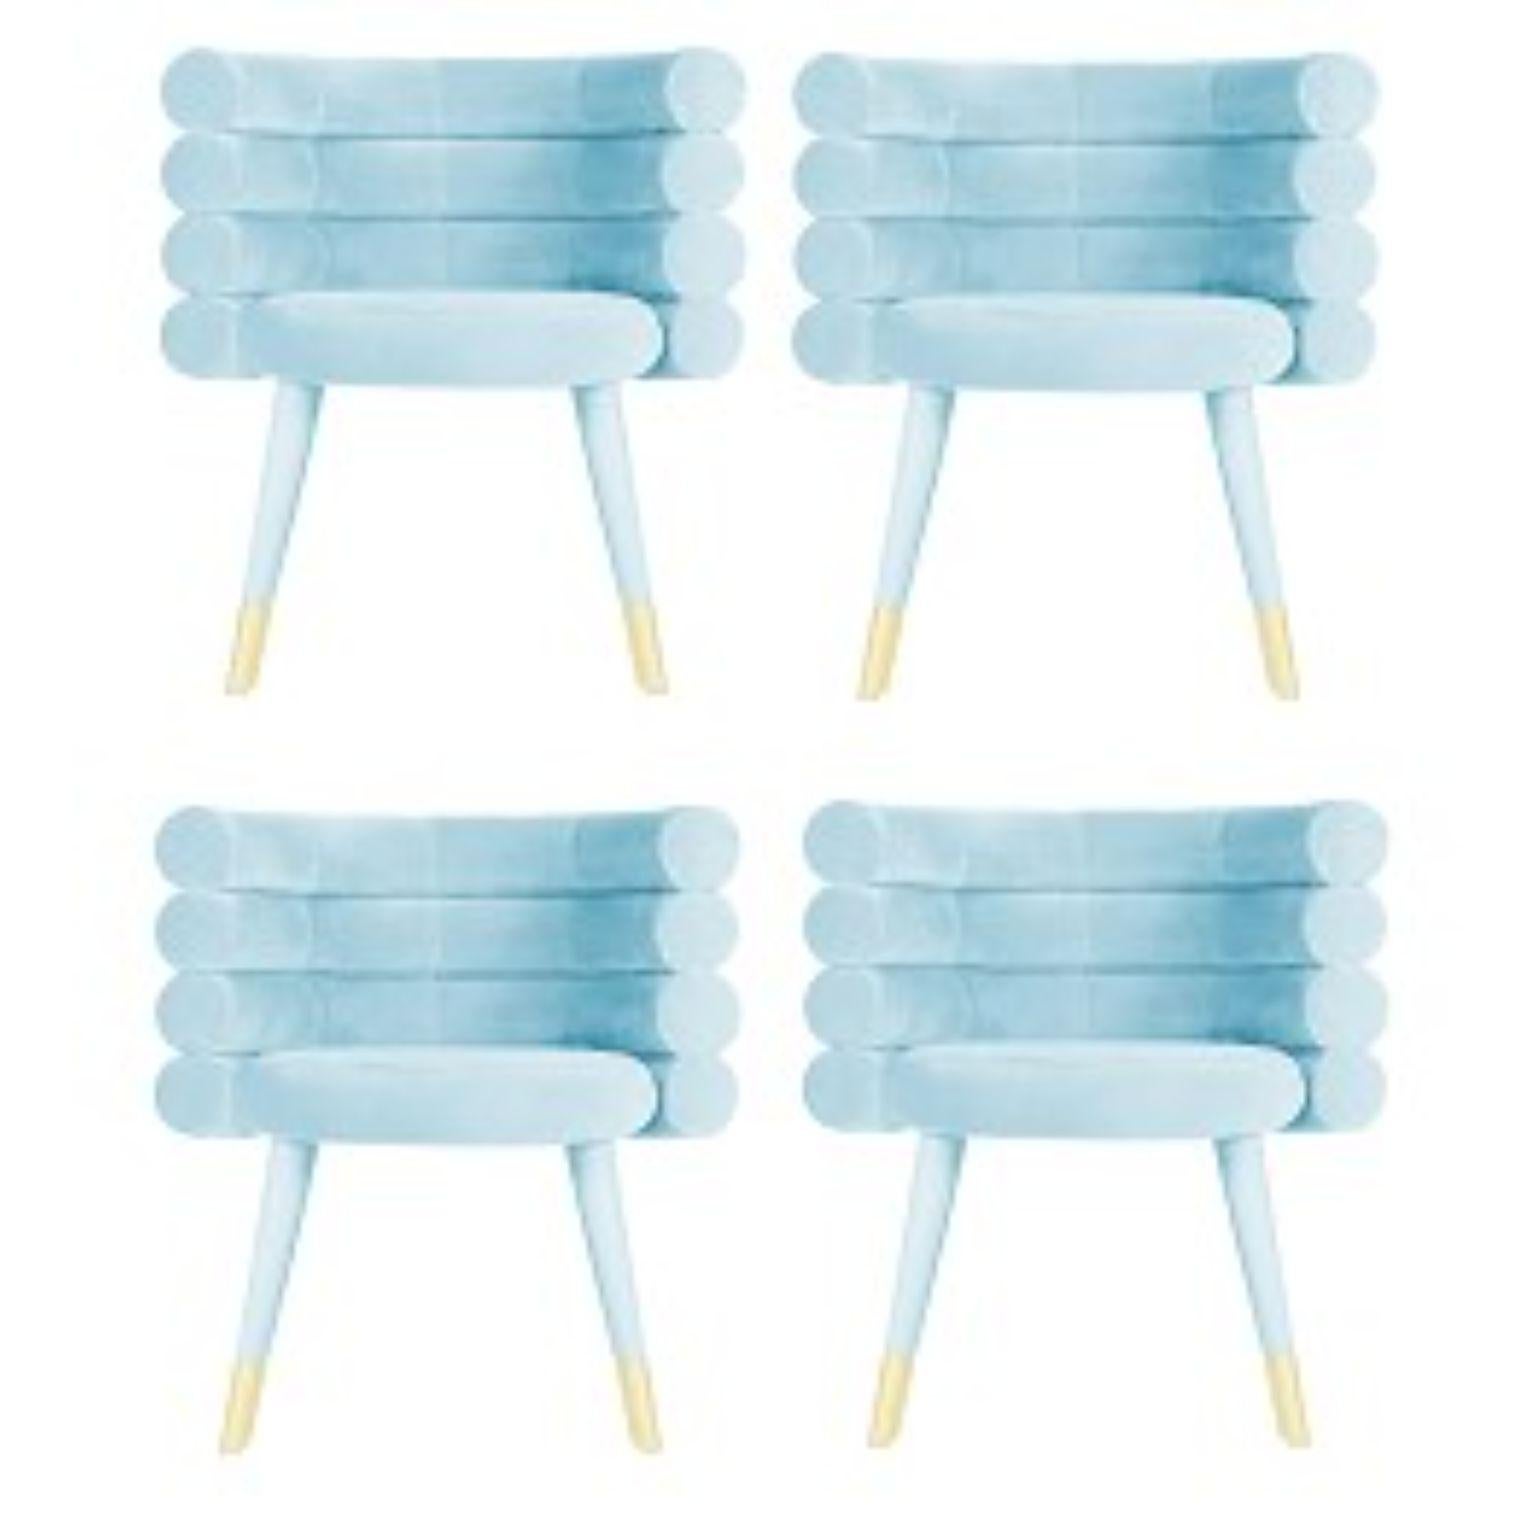 Set of 4 sky blue marshmallow dining chairs, Royal Stranger
Dimensions: 78 x 70 x 60 cm
Materials: Velvet upholstery and brass
Available in: Mint green, light pink, royal green and royal red

Royal Stranger is an exclusive furniture brand